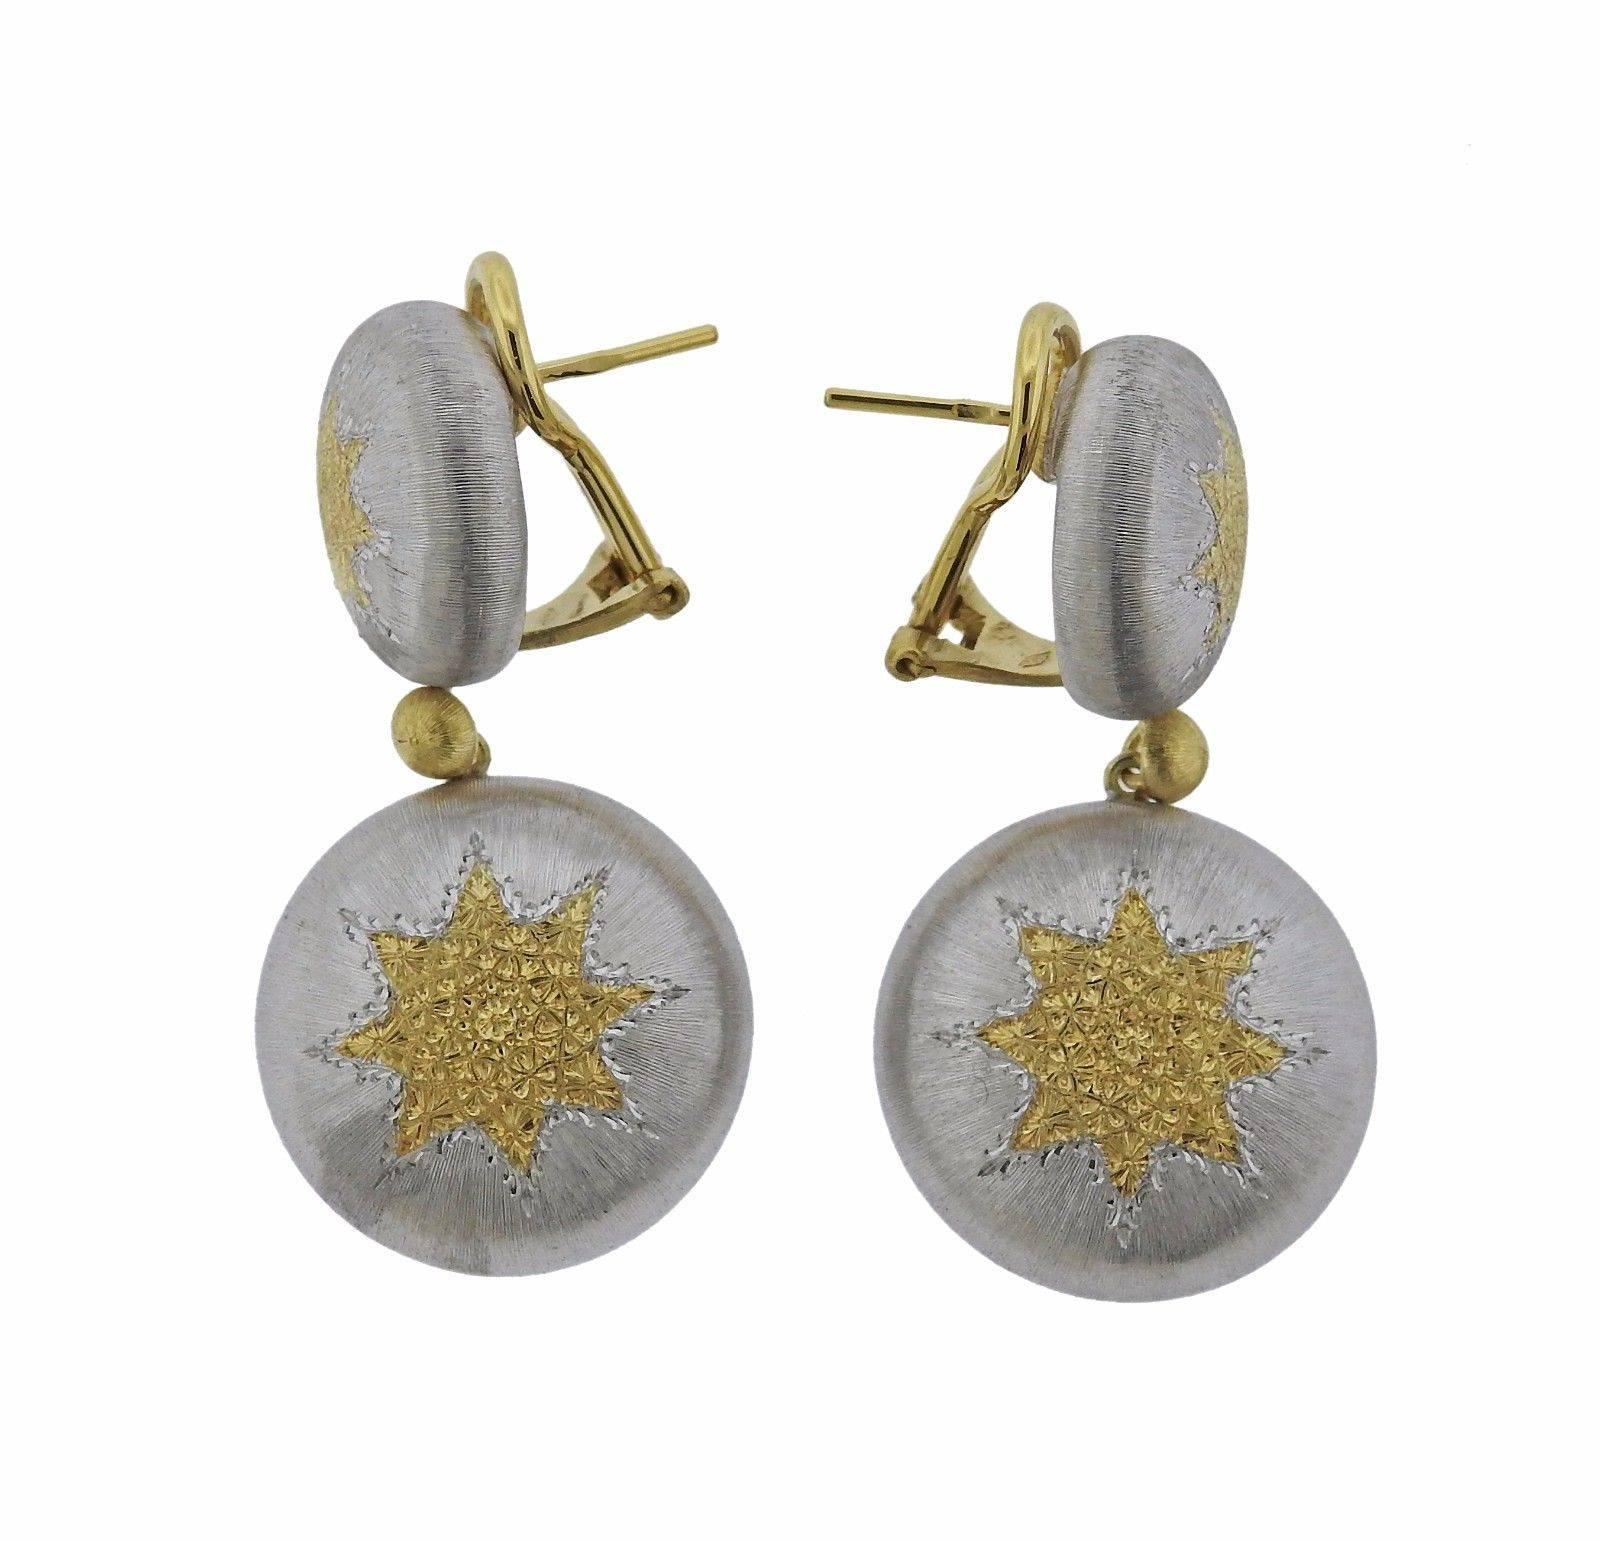 A pair of 18k yellow gold and sterling silver earrings from the Geminato collection by Buccellati.  The earrings measure 38mm long x 20mm wide and weigh 16.4 grams.  Marked: P4019, Buccellati, Buccellati, 925, 750.  The earrings currently retail for